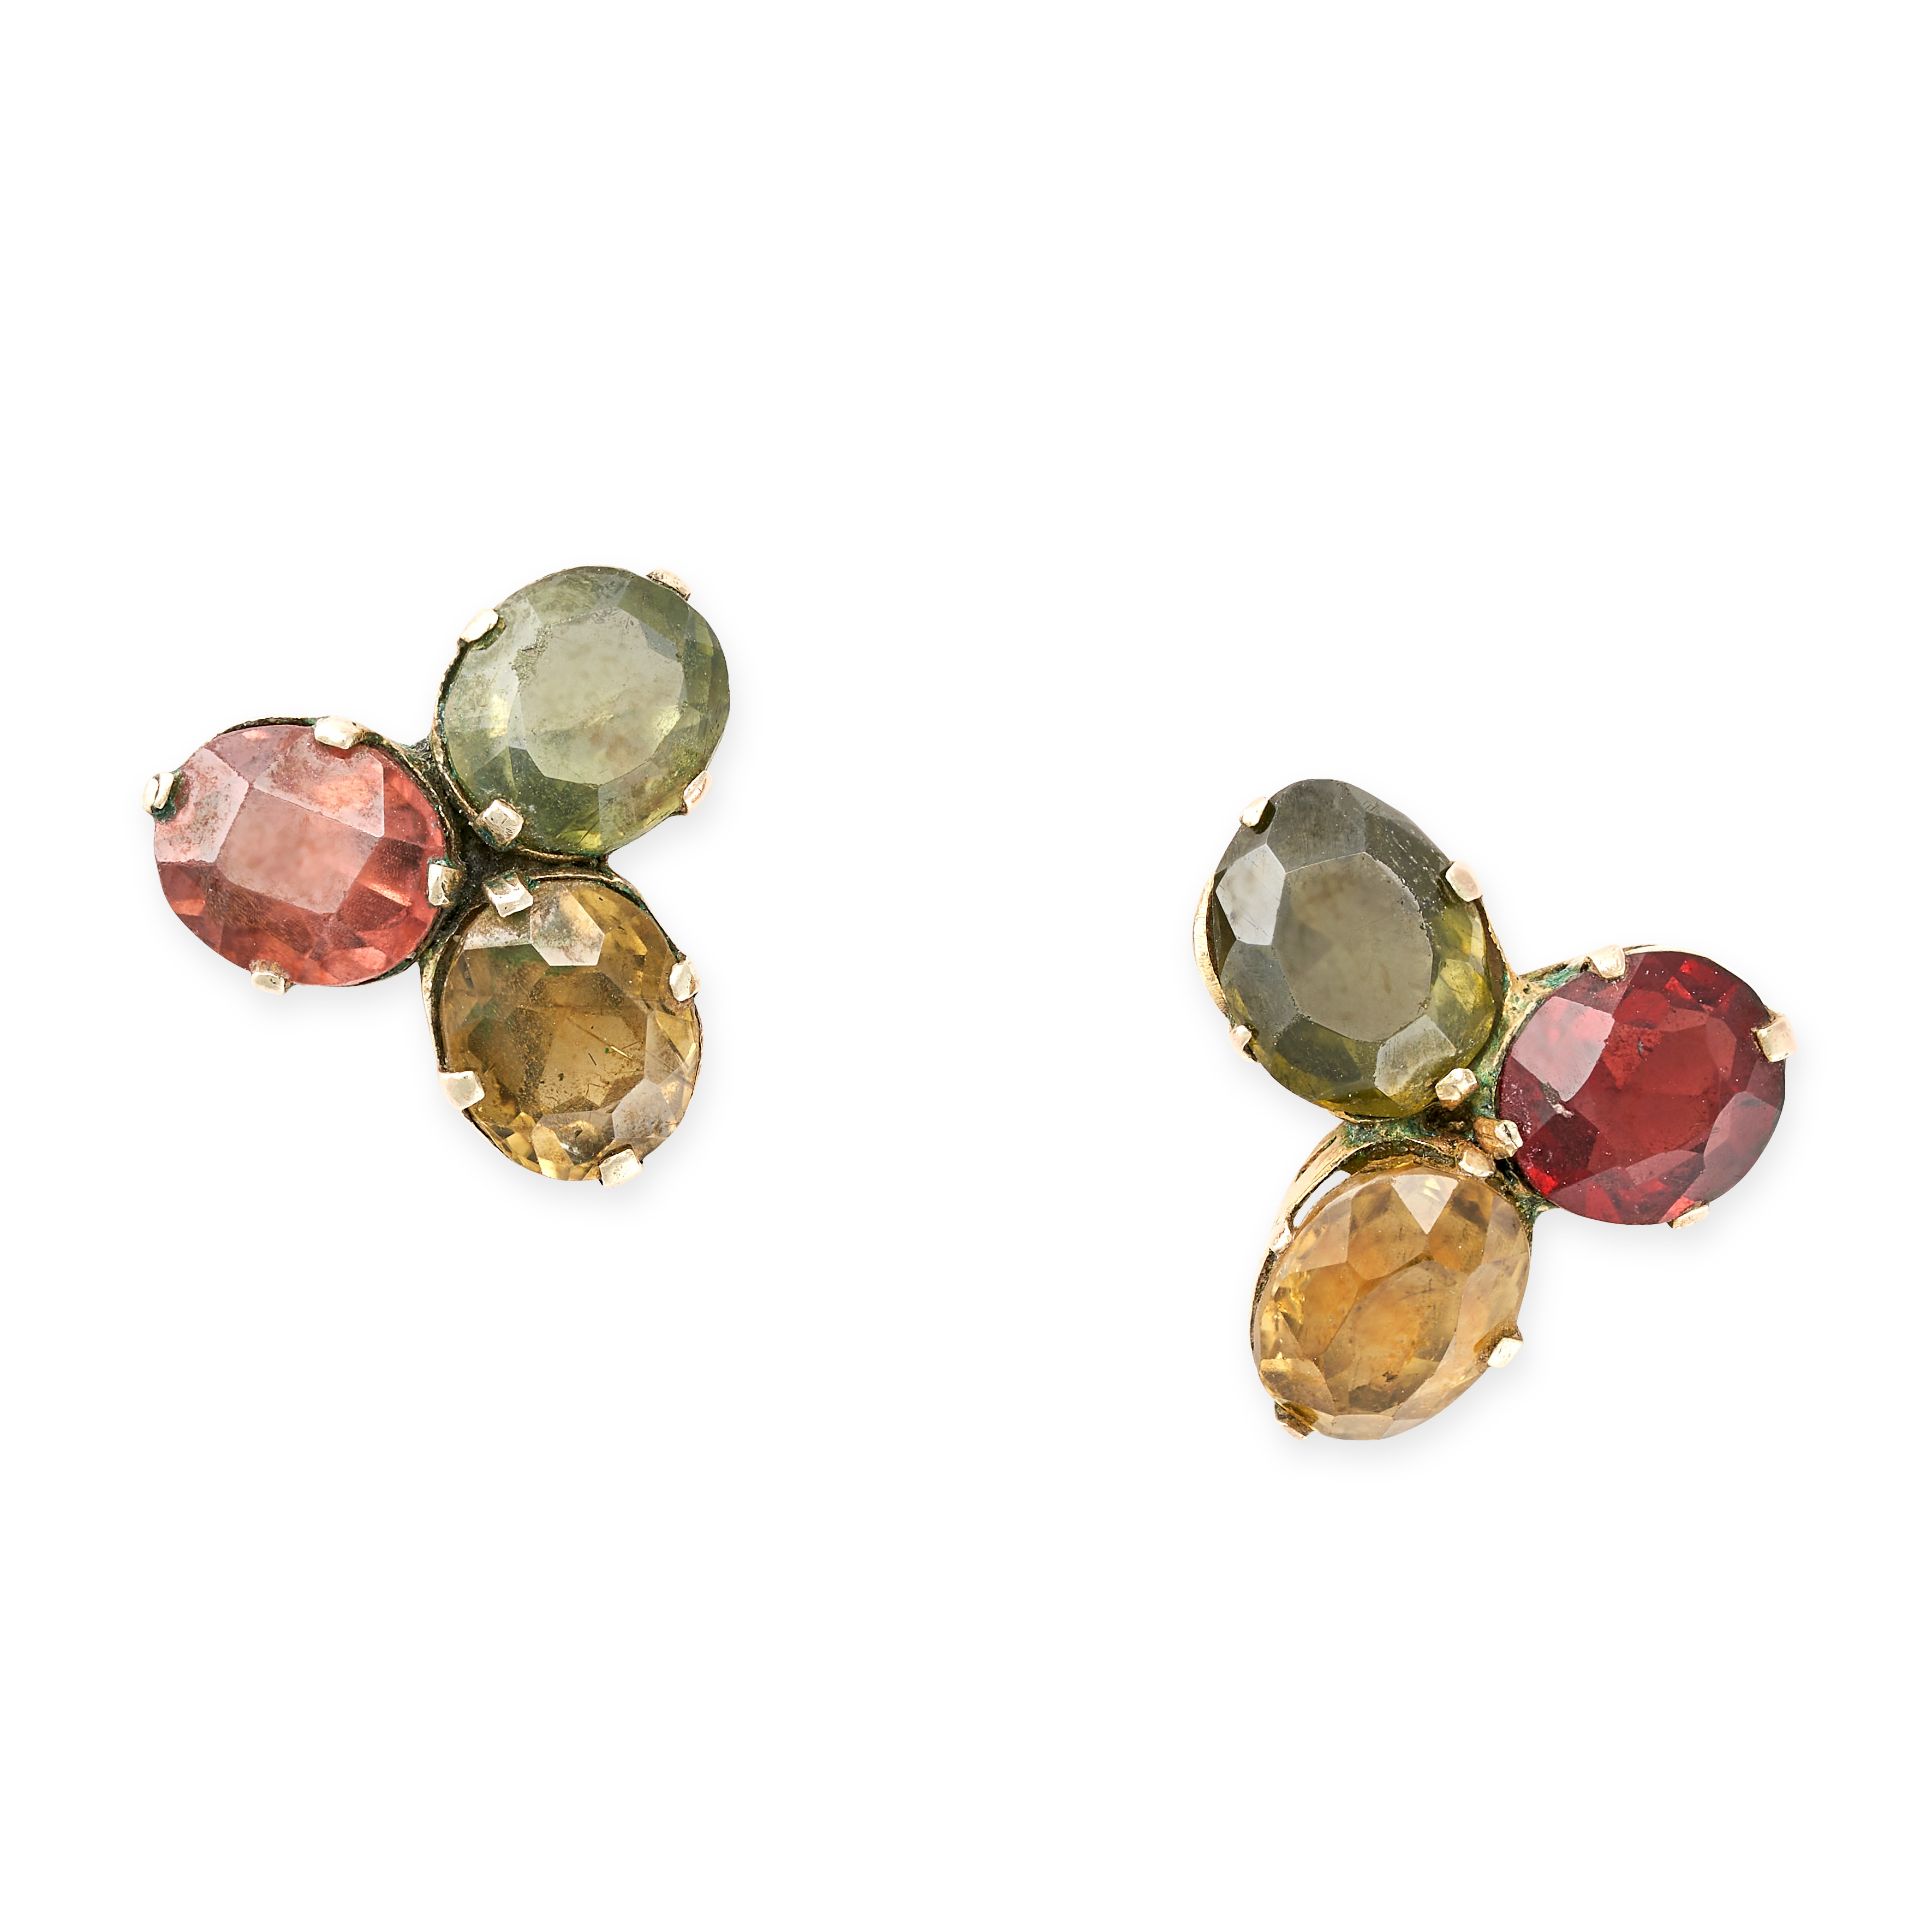 NO RESERVE - A PAIR OF VINTAGE GARNET, ZIRCON AND CITRINE EARRINGS in yellow gold, each set with ...